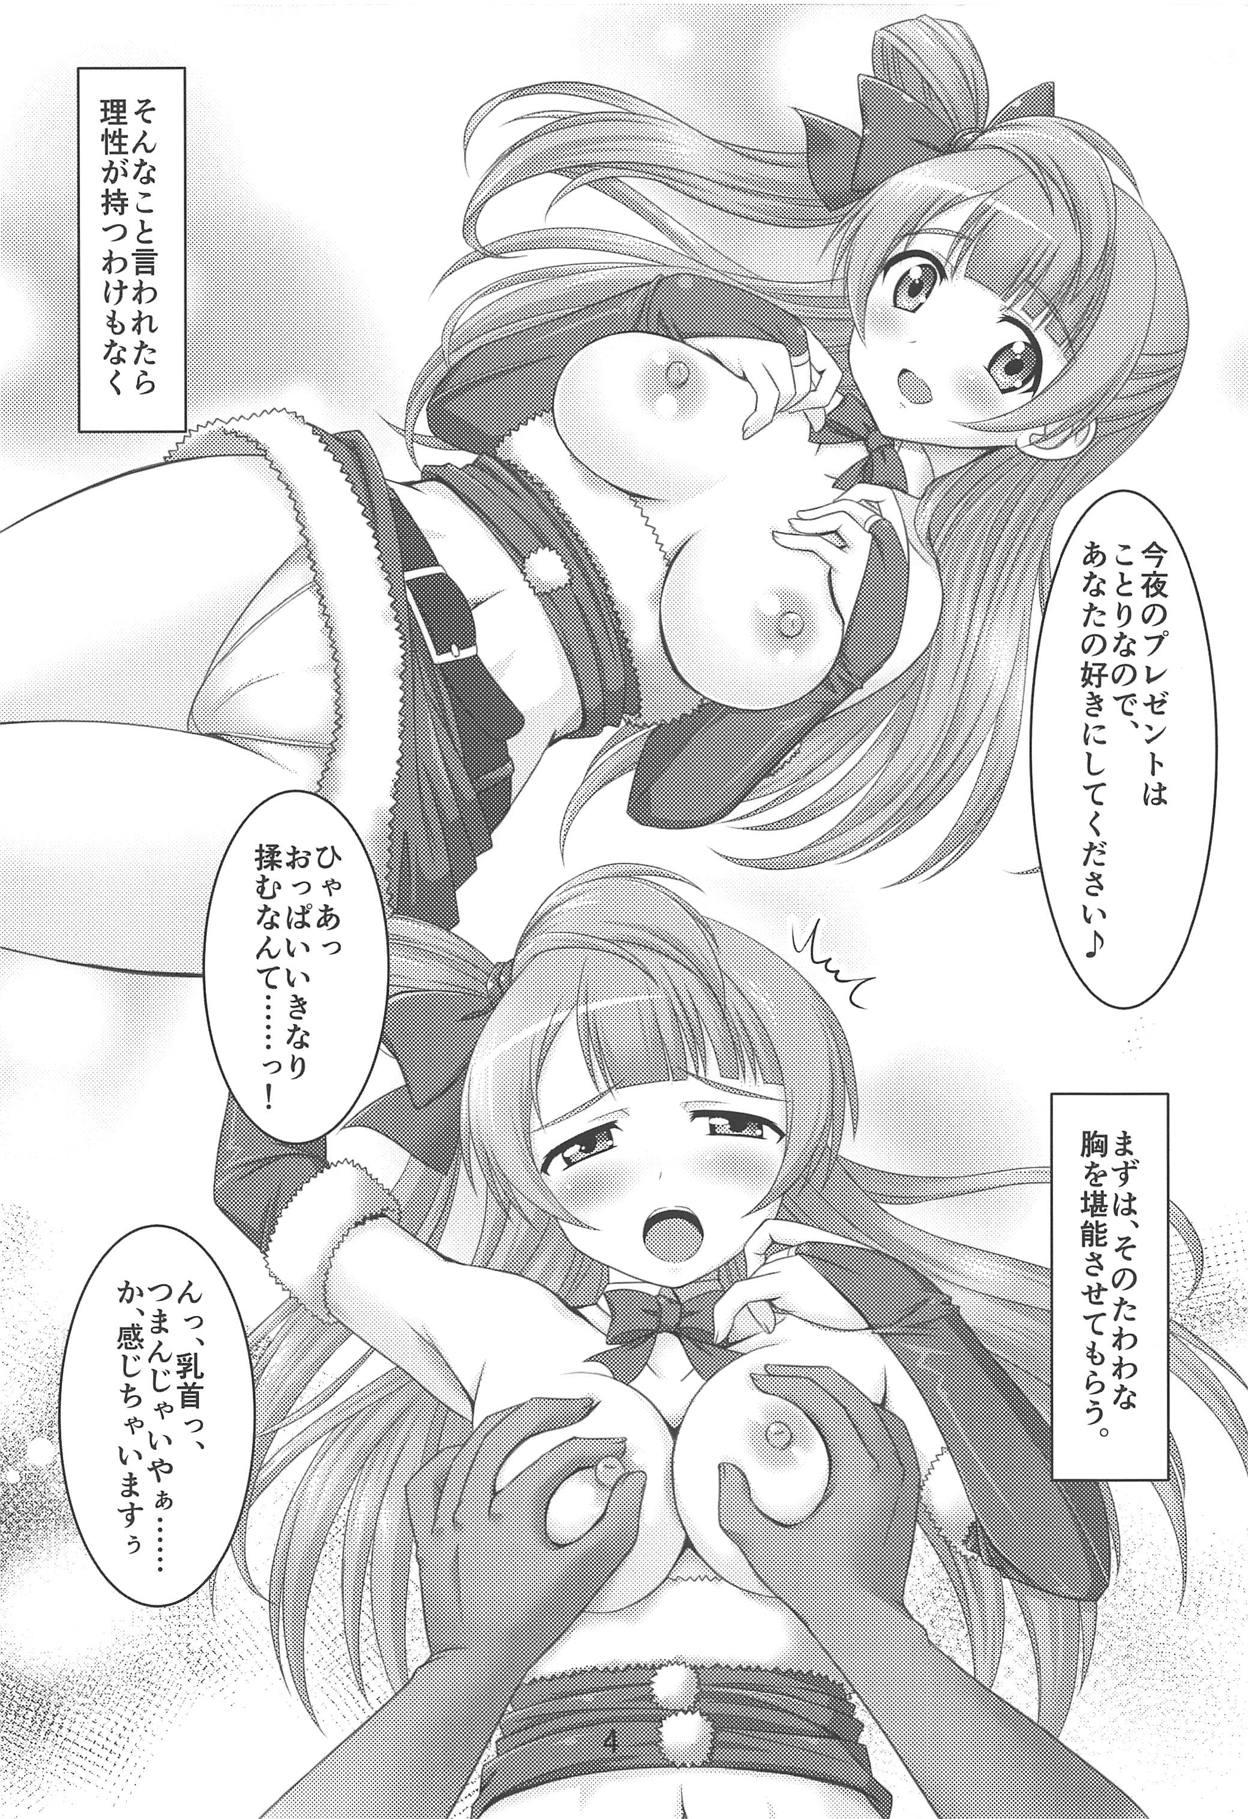 Nigeria Kotori to Asa made Issho 3 - Love live Adult Toys - Page 3